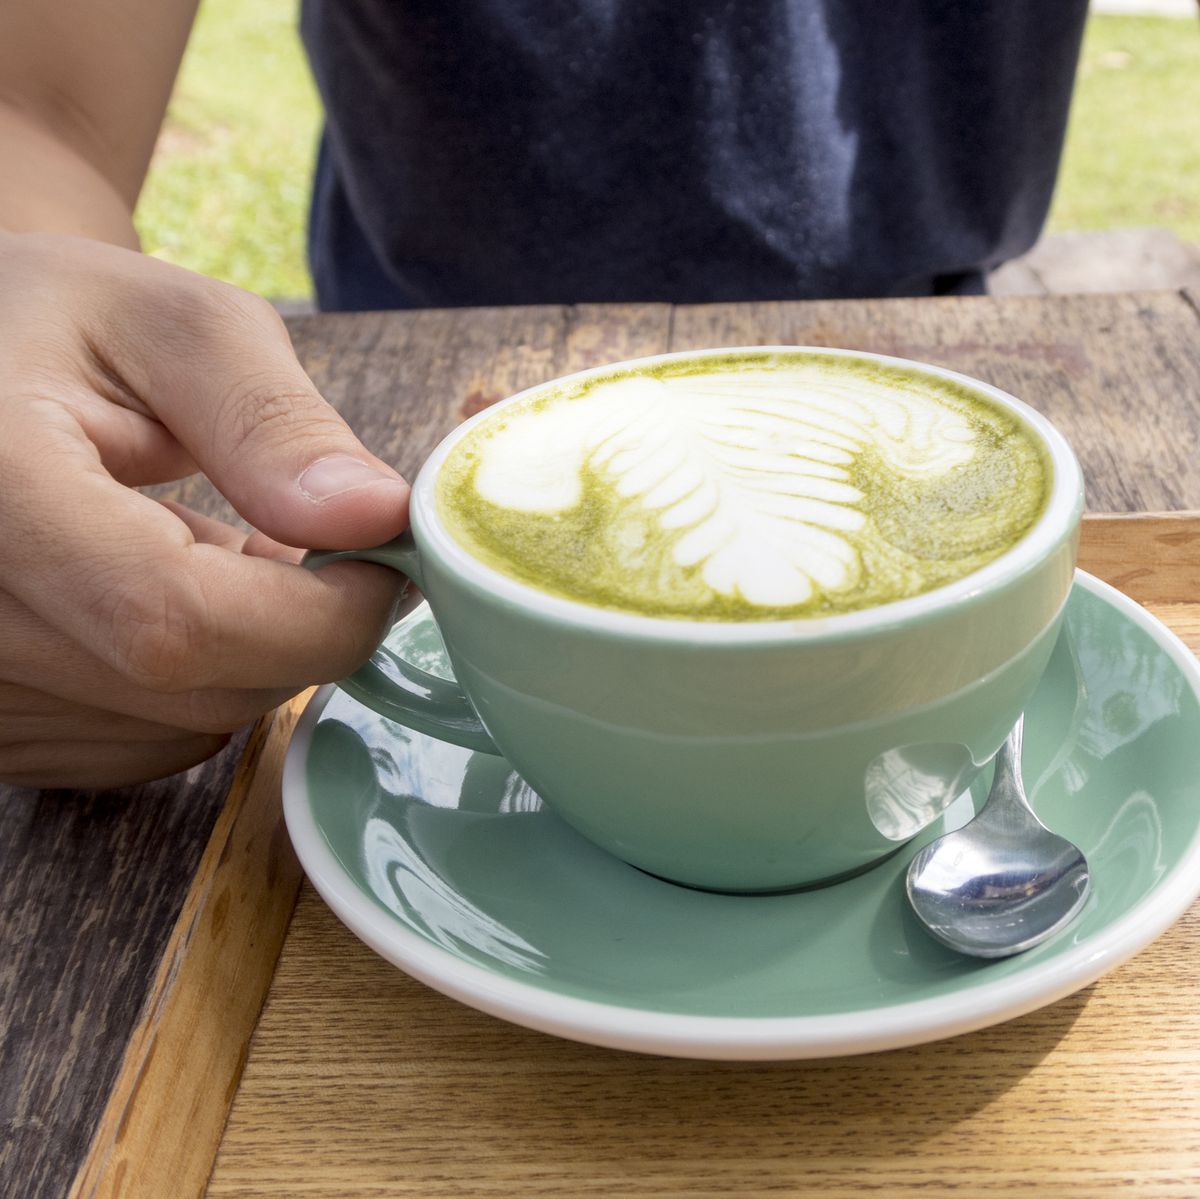 man holding a cup of hot green tea latte on wooden table.